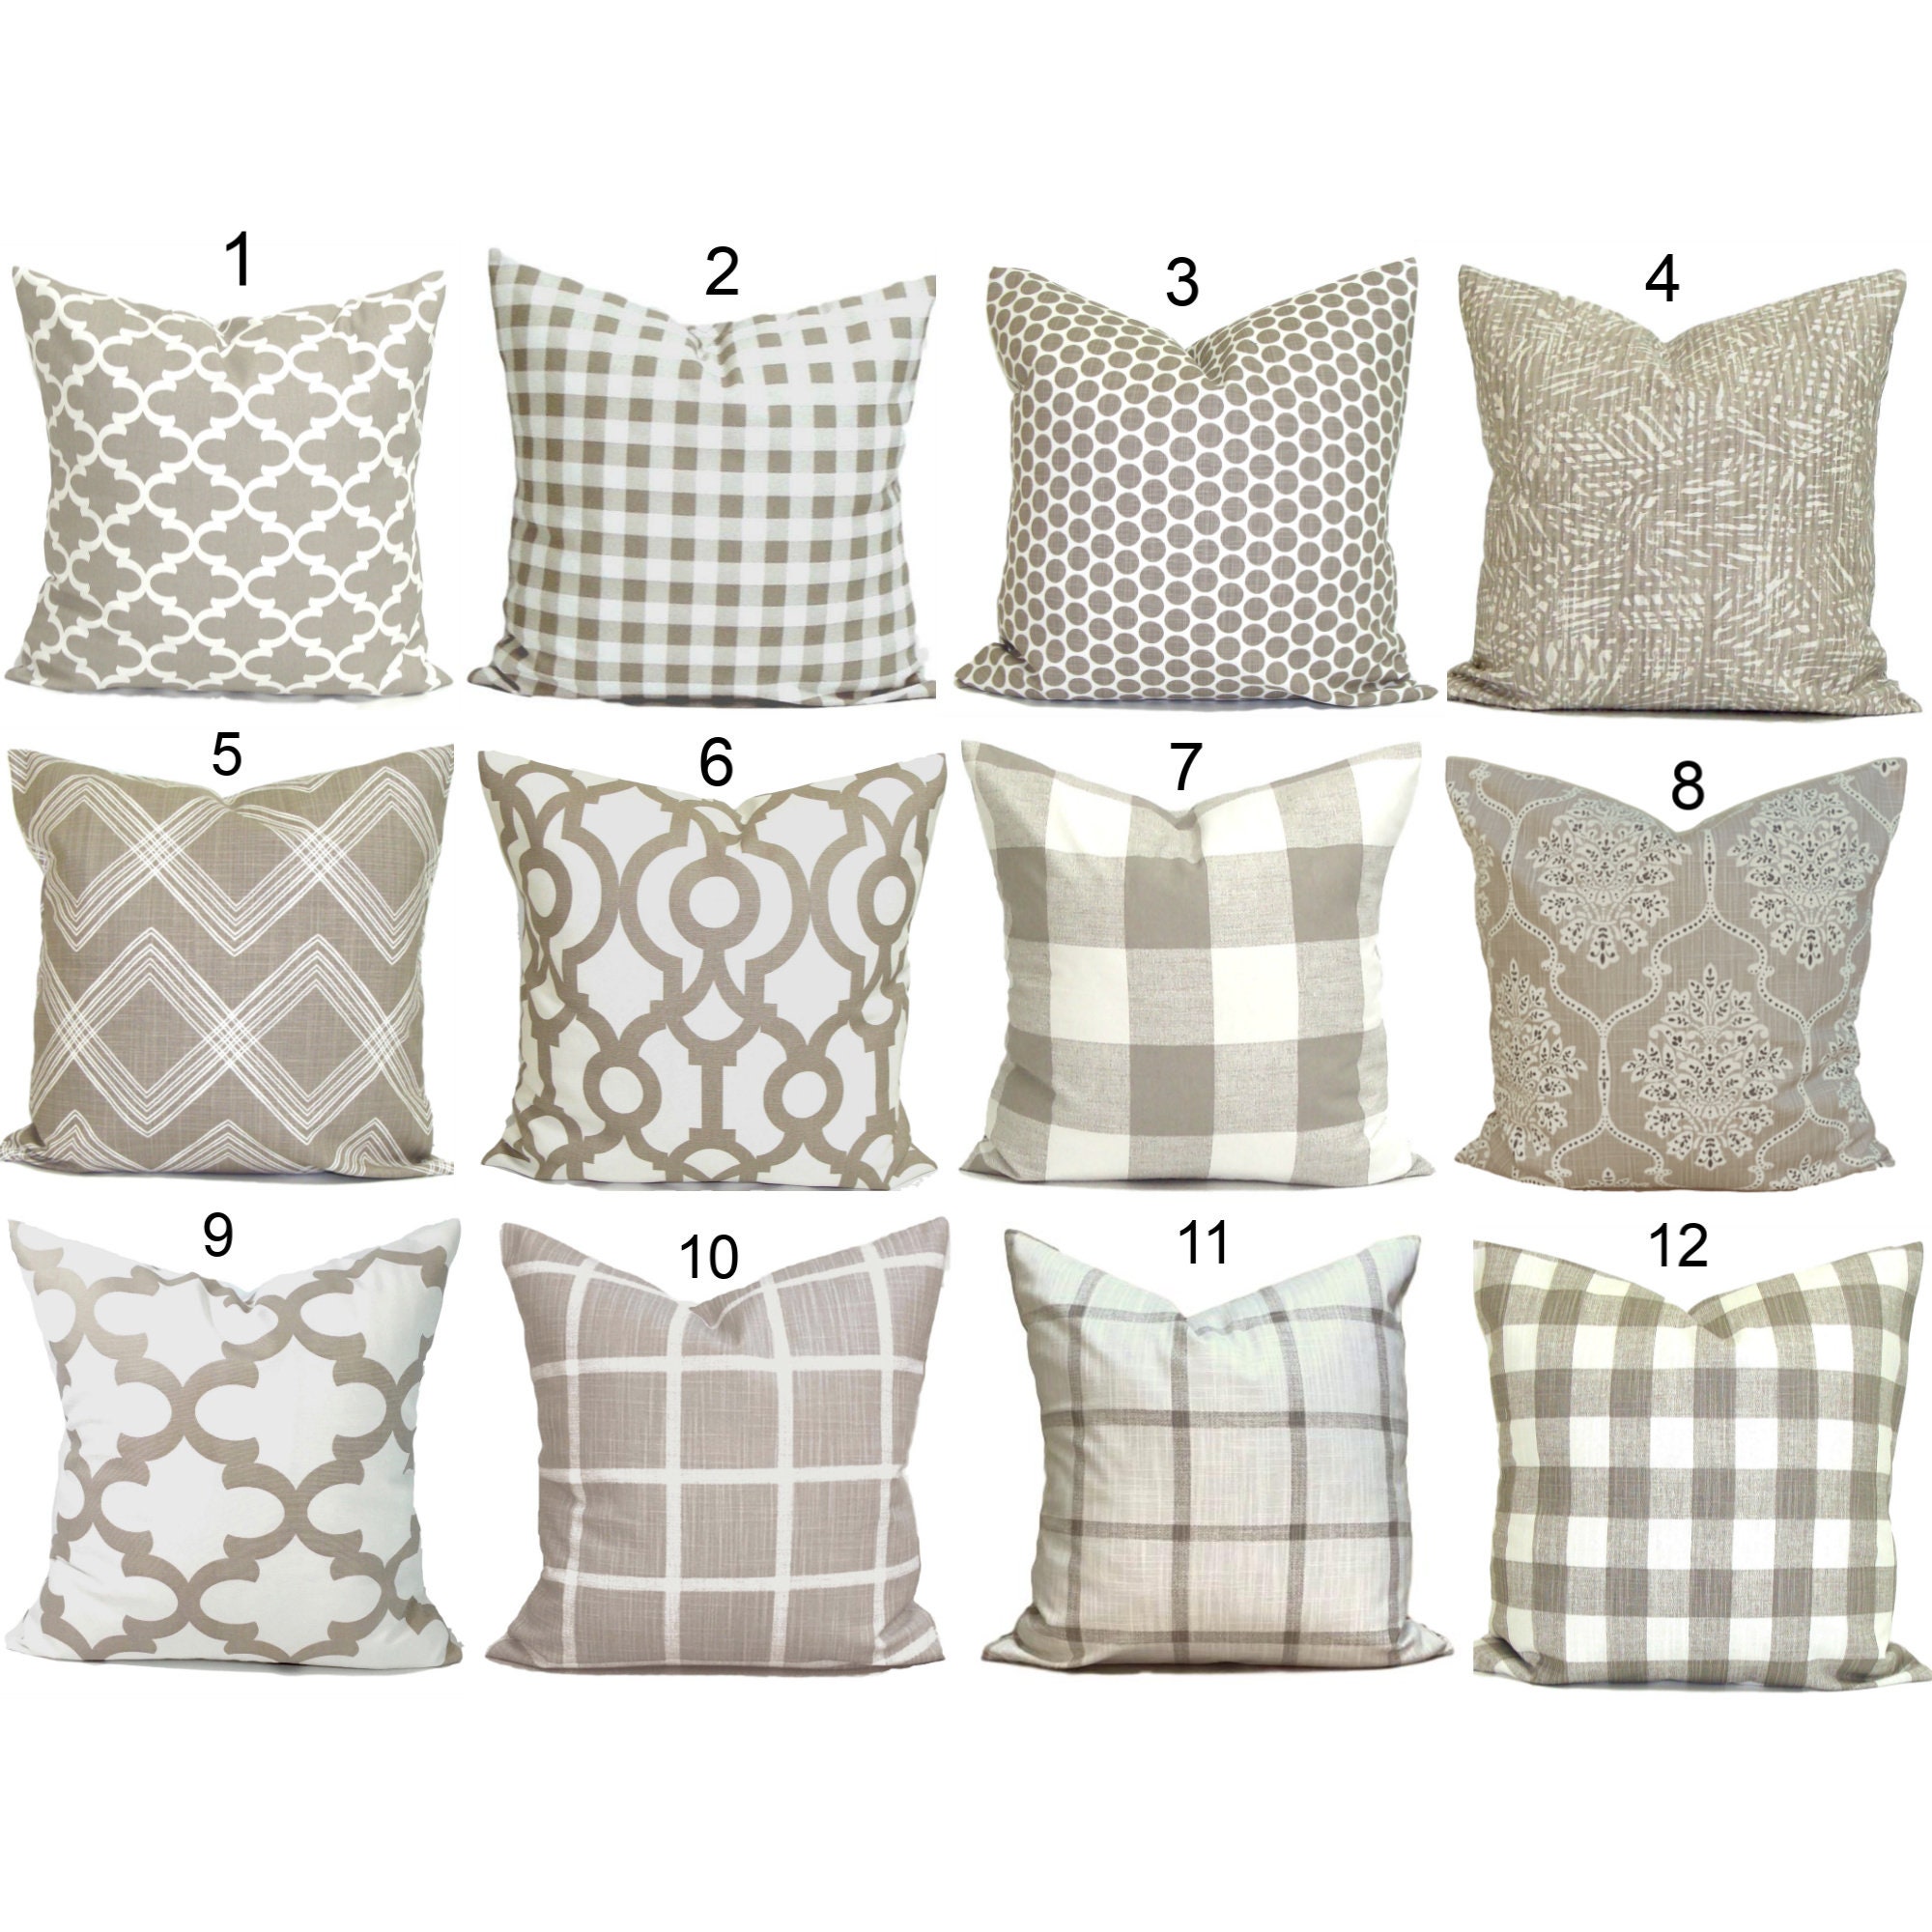 Hannah Linen Throw Pillows - 18 x 18 Pillow Insert Set of 4 - Throw Pillows  for Couch & Bed - Soft & Comfortable Square Pillows - Indoor/Outdoor